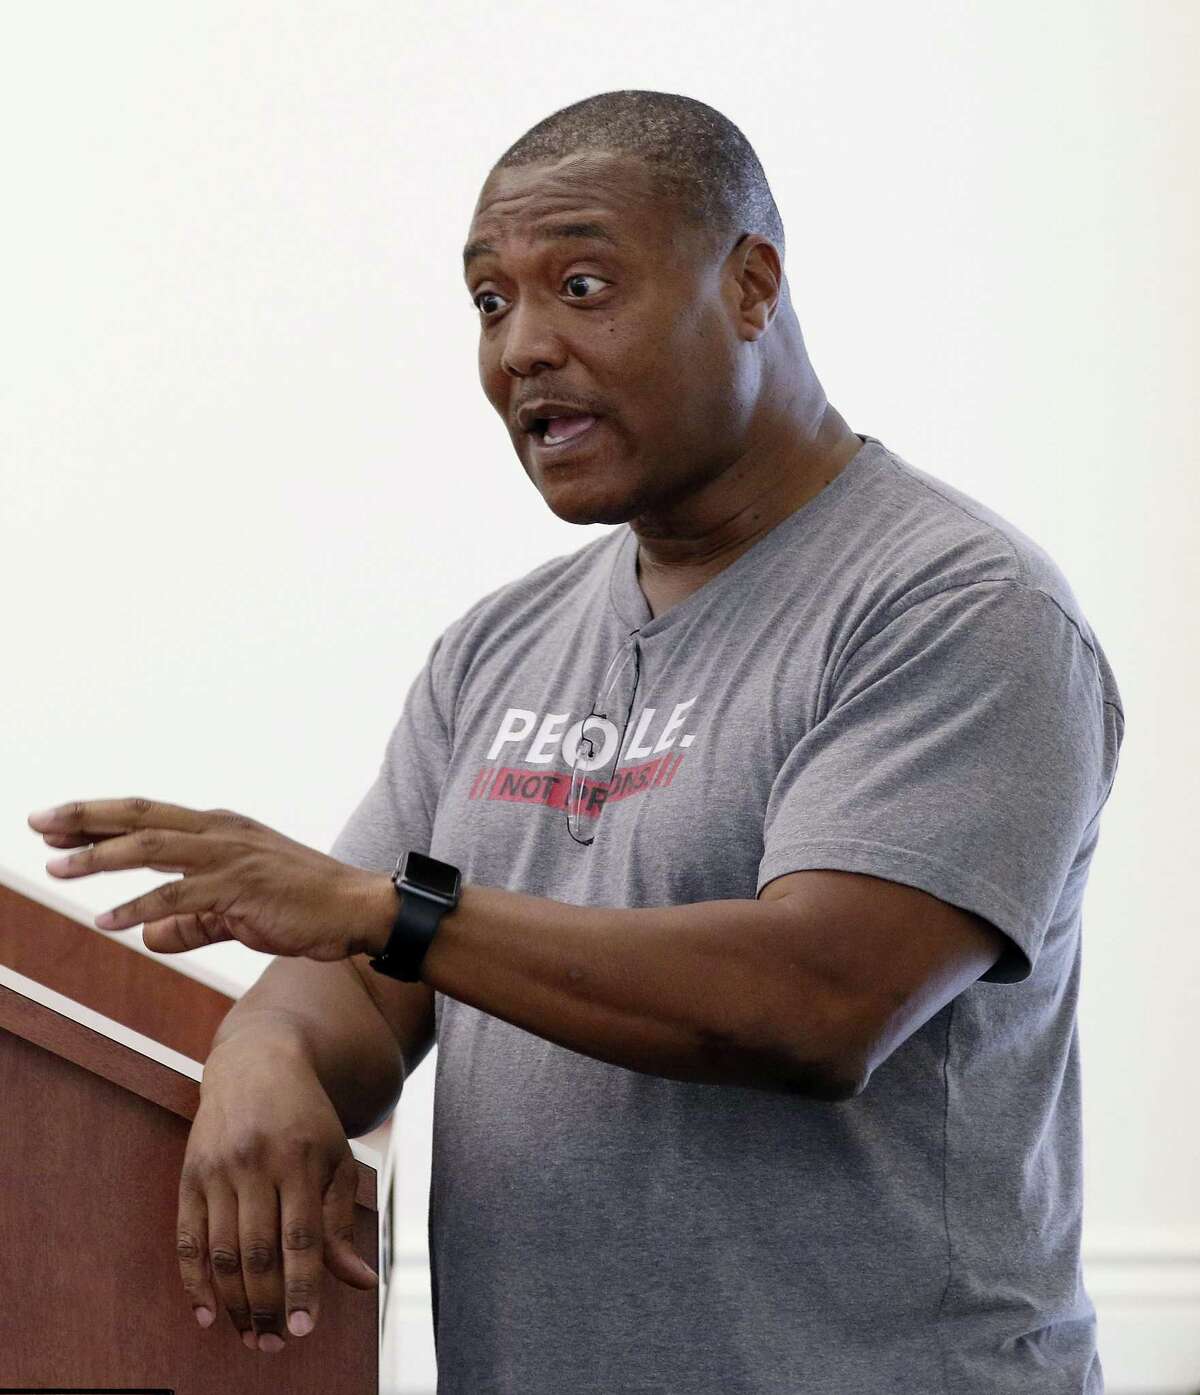 Anthony Graves, who served 18 and a half years for a murder he did not commit, speaks during pre-class ceremonies for the inaugural class of the Anthony Graves Smart Justice Speaker's Bureau at Thurgood Marshall School of Law at Texas Southern University Saturday, Sep. 15, 2018 in Houston, TX.